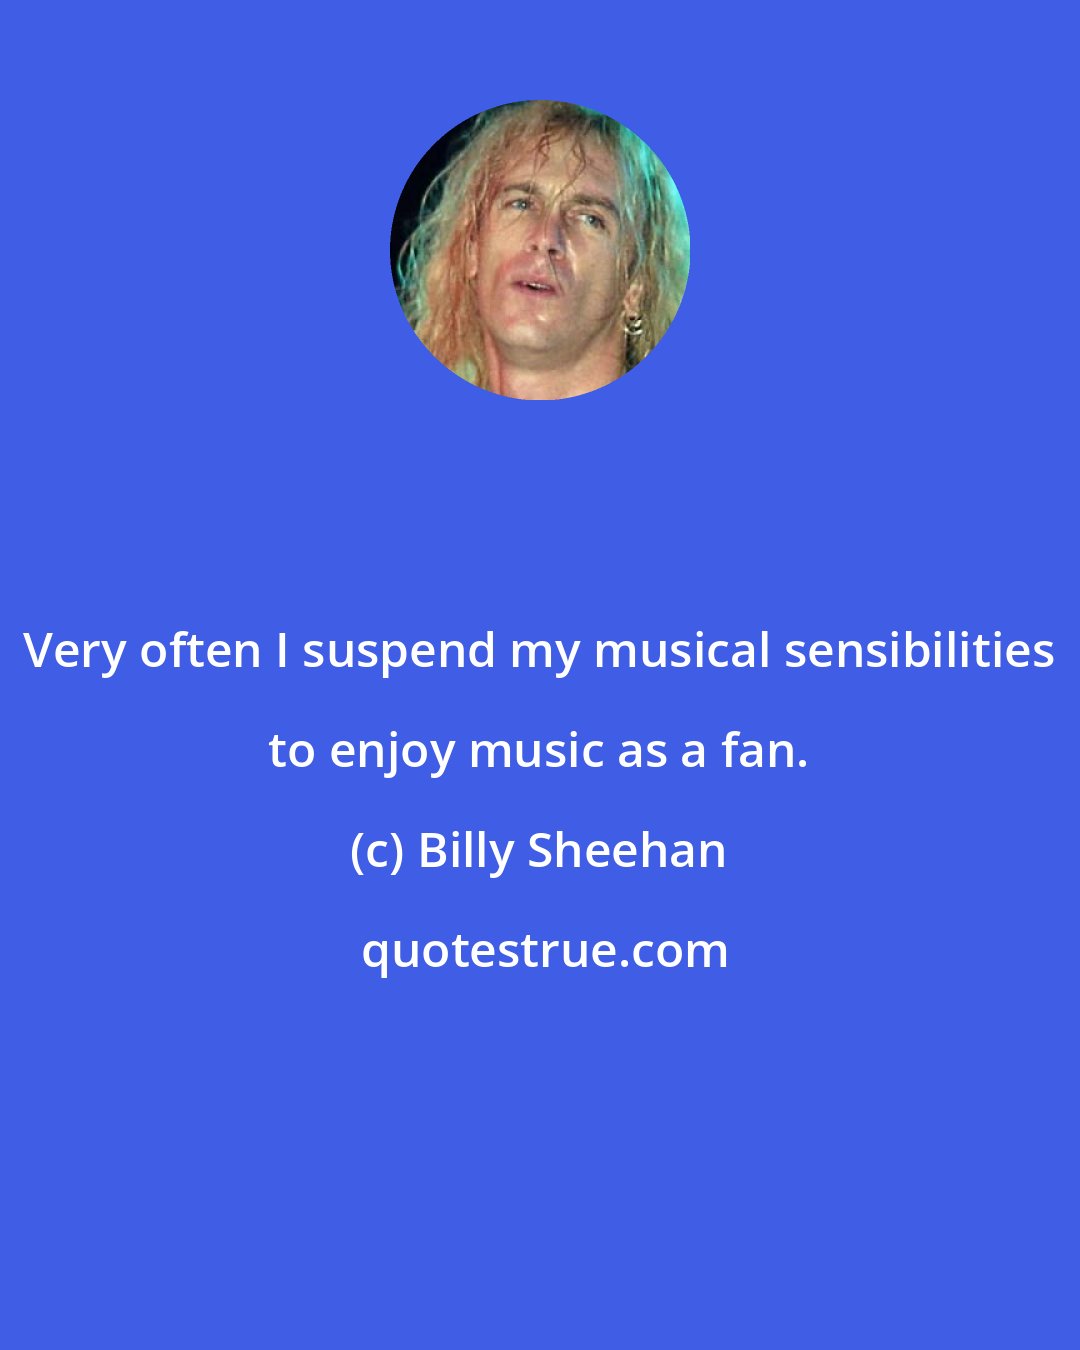 Billy Sheehan: Very often I suspend my musical sensibilities to enjoy music as a fan.